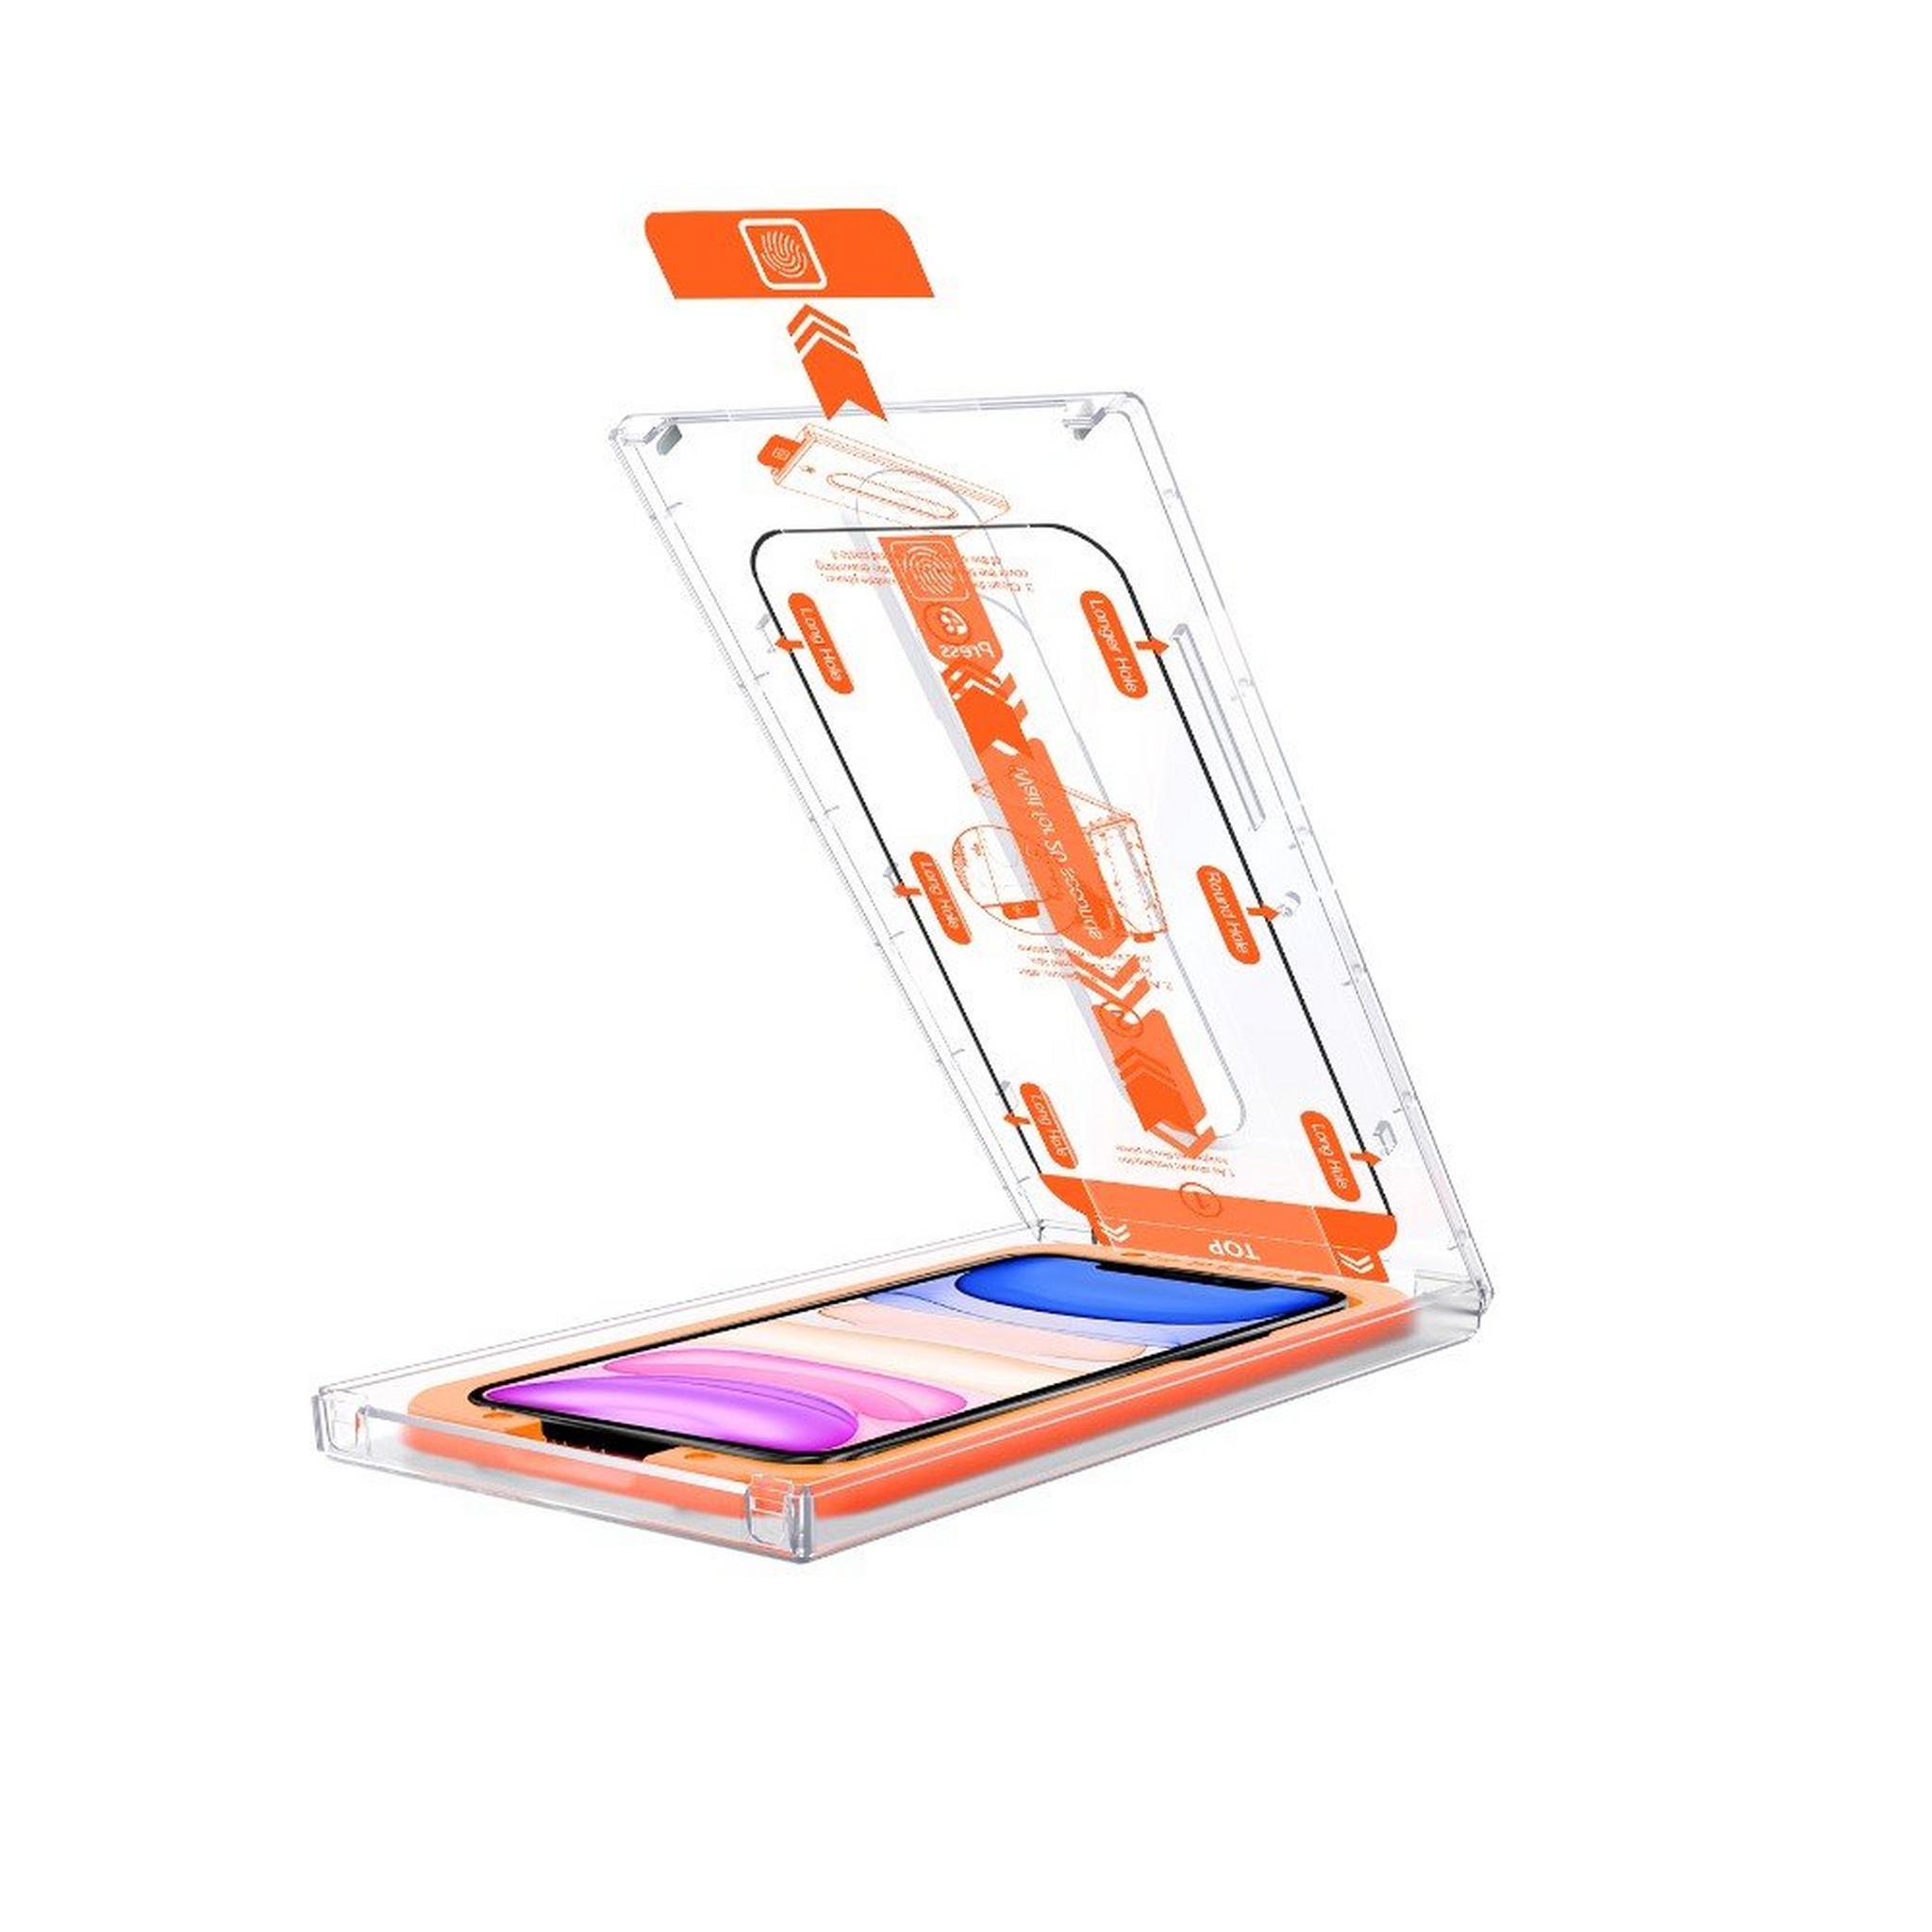 EQ Screen Protector For Iphone 11 + Applicator - Clear